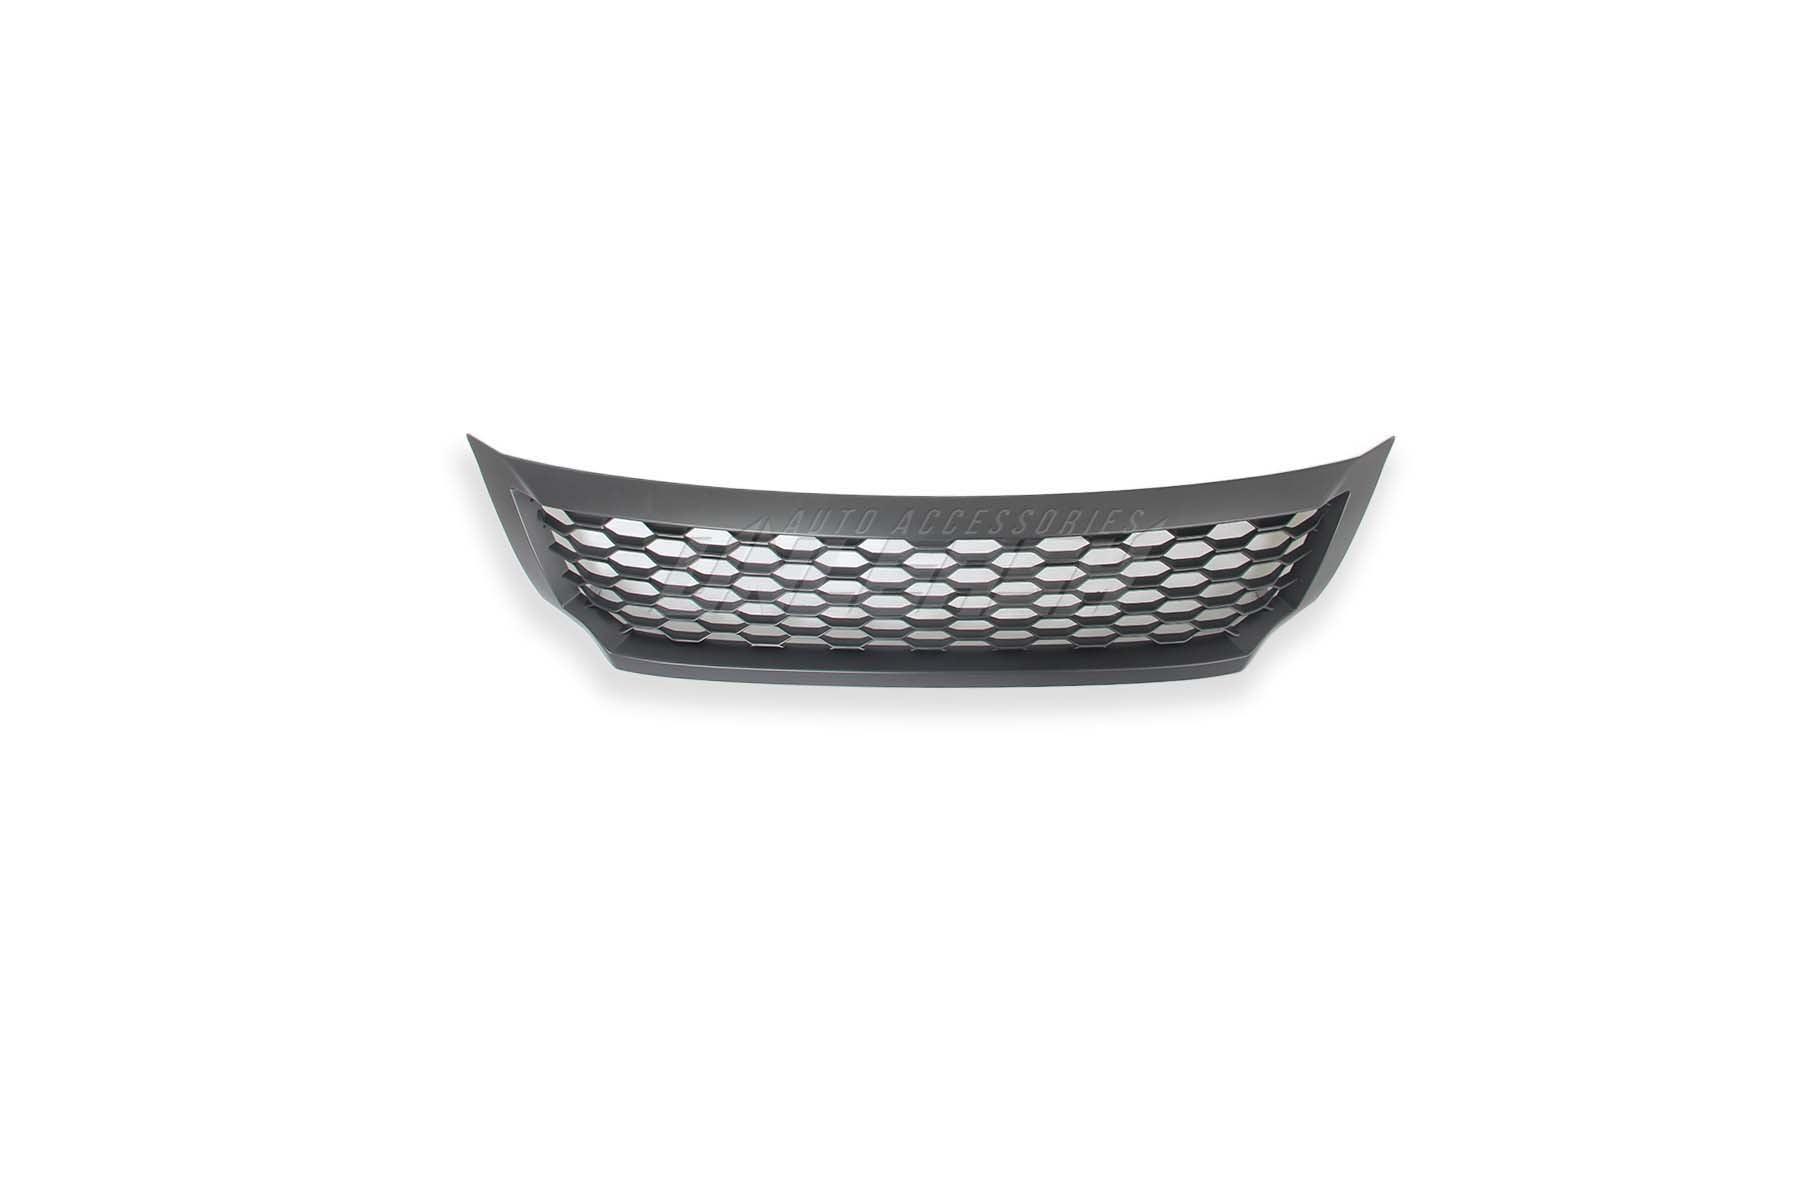 Grille for Nissan Navara NP300 2015-2020 Model Style A - Prolink Performance